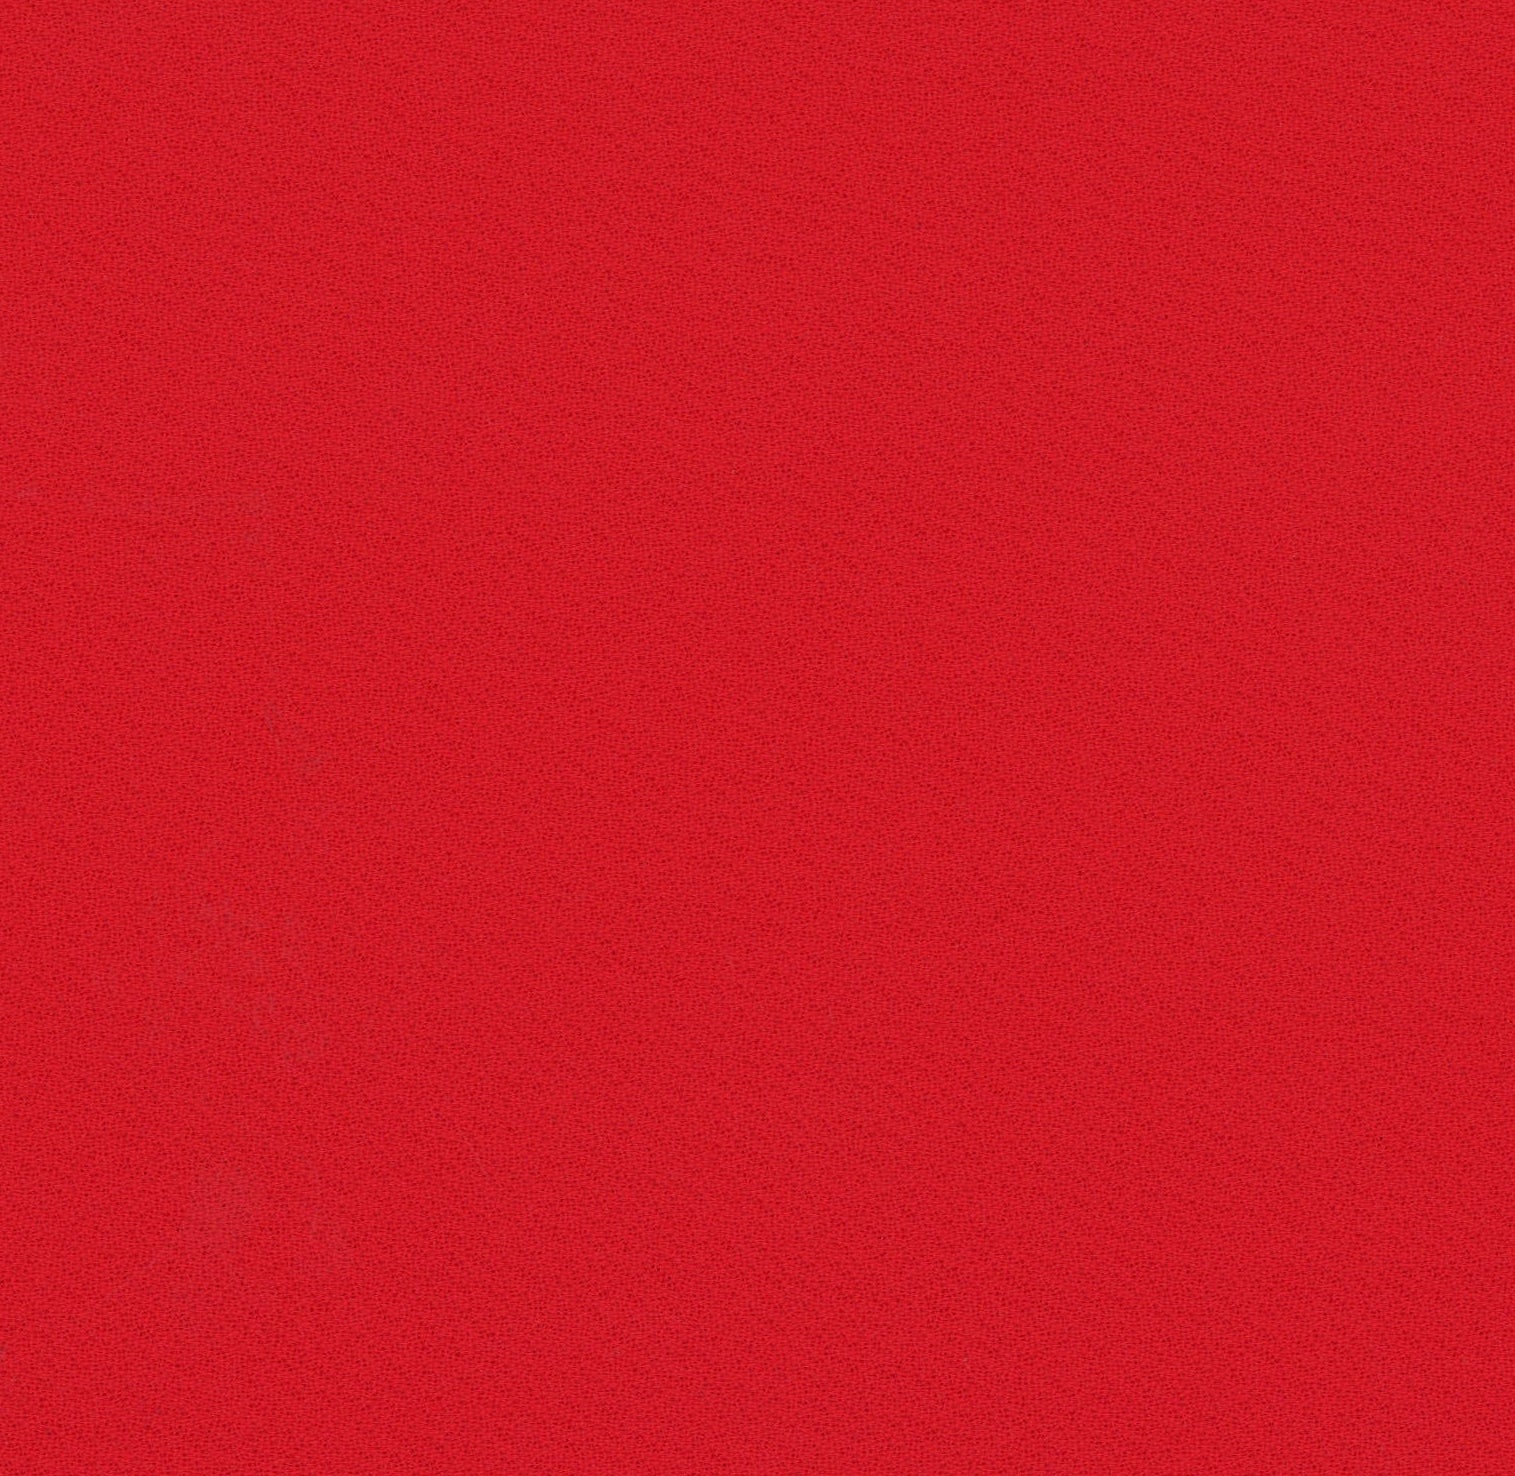 35005-09 Tomato Red Polyester Plain Dyed 280g/yd 54" plain dyed polyester red woven Solid Color - knit fabric - woven fabric - fabric company - fabric wholesale - fabric b2b - fabric factory - high quality fabric - hong kong fabric - fabric hk - acetate fabric - cotton fabric - linen fabric - metallic fabric - nylon fabric - polyester fabric - spandex fabric - chun wing hing - cwh hk - fabric worldwide ship - 針織布 - 梳織布 - 布料公司- 布料批發 - 香港布料 - 秦榮興